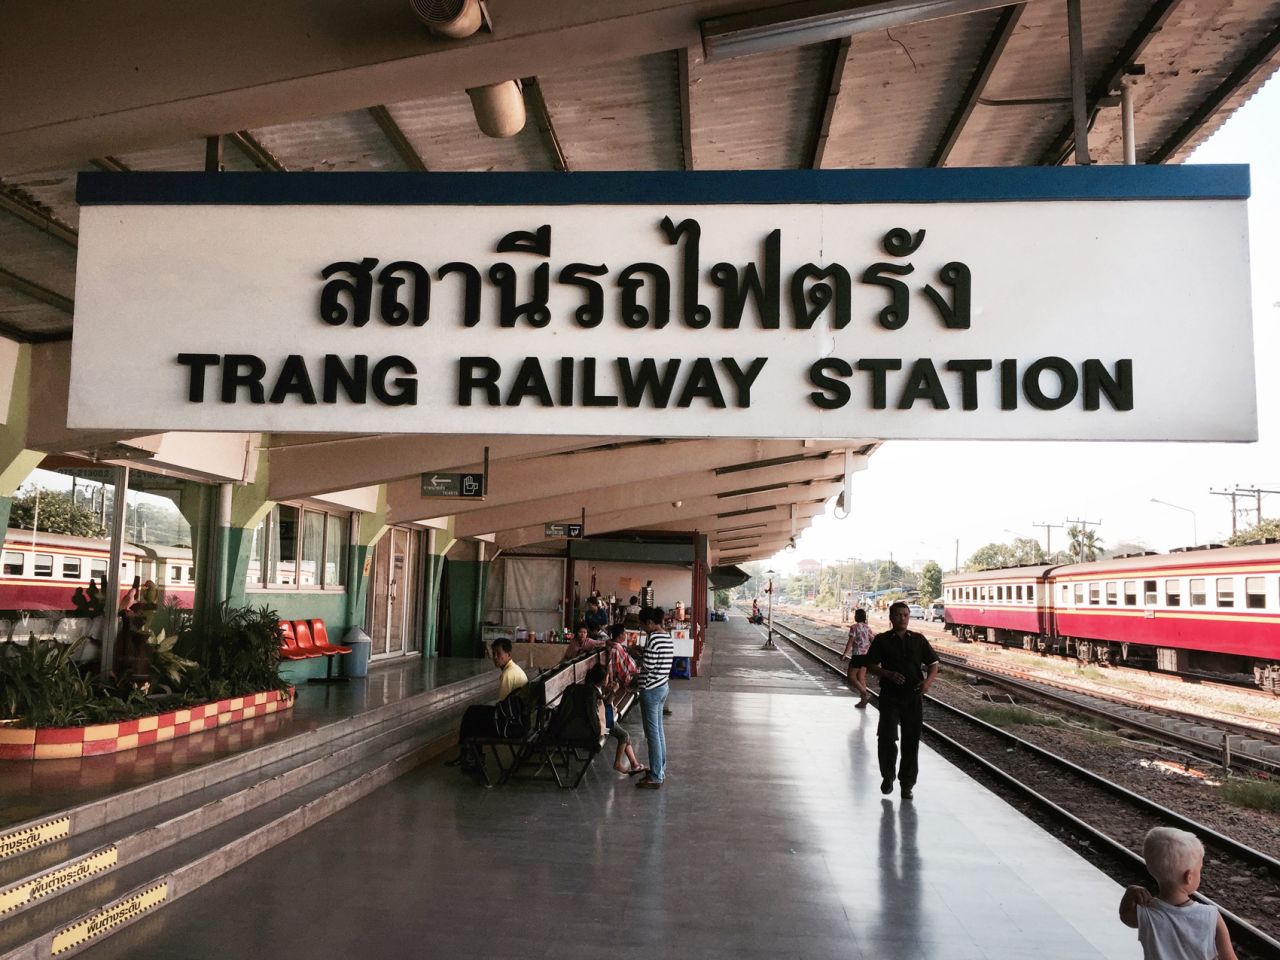 Located southeast of Phuket, Trang is an important rail link to Laos and Singapore. Near the station, the Kopi 1942 cafe serves great dim sum, dumplings and coffee, southern Thai style. 